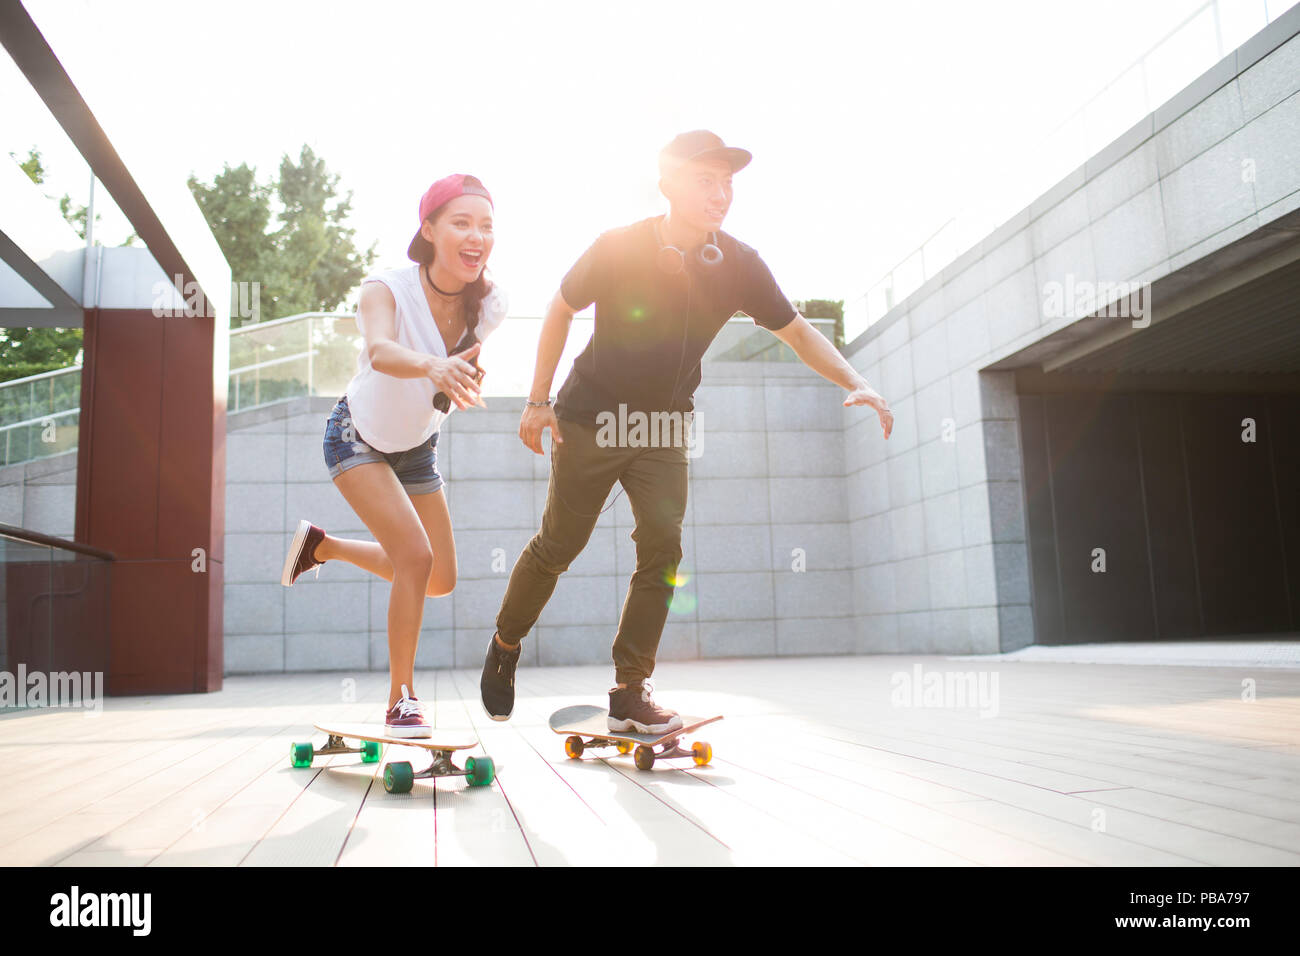 Cheerful young Chinese couple skateboarding Stock Photo